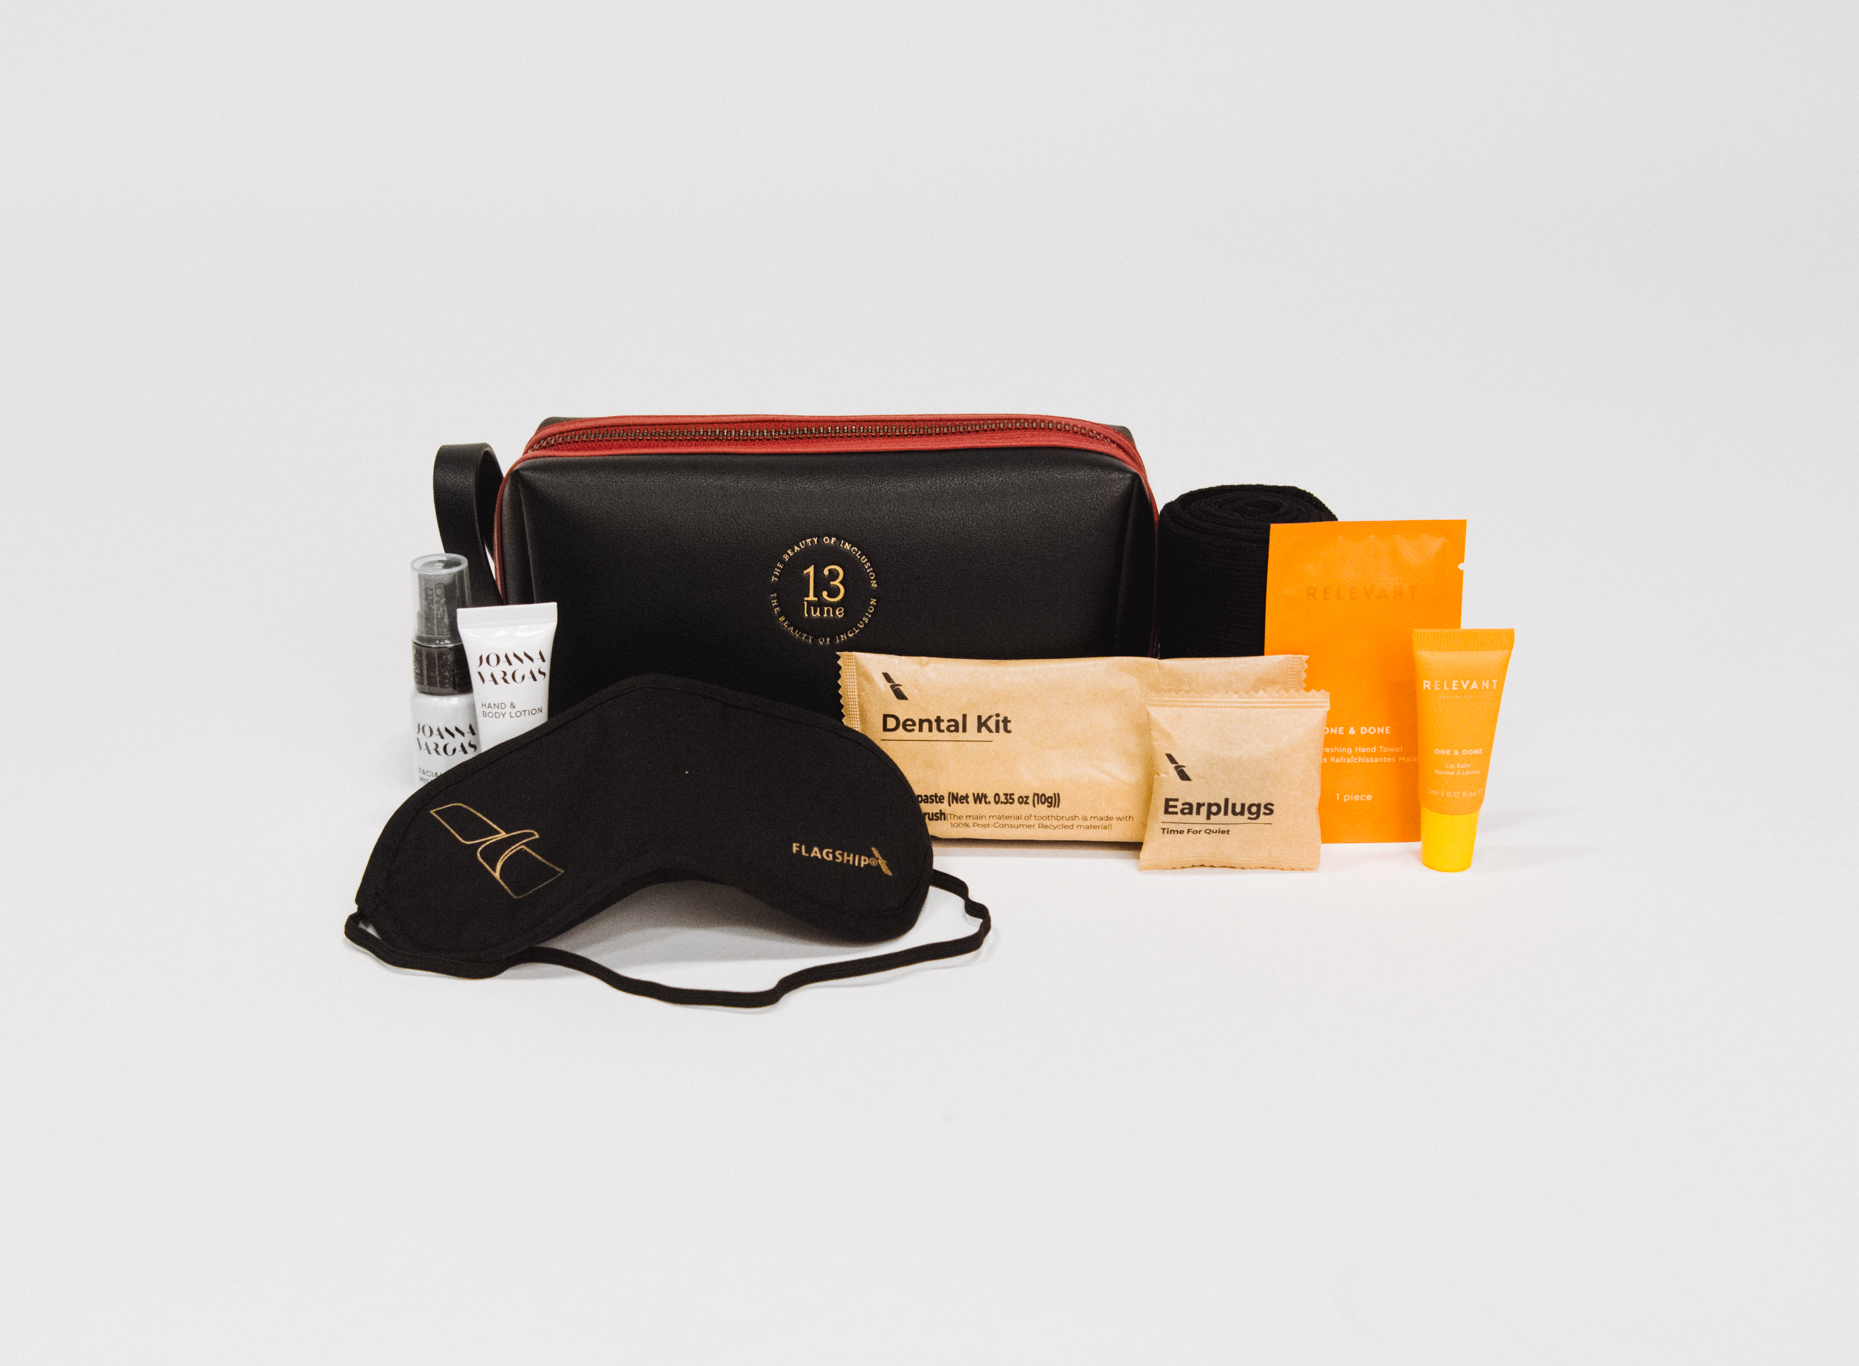 American Airlines Limited Edition Thirteen Lune Flagship First Class Amenity Kit - Travel News, Insights & Resources.